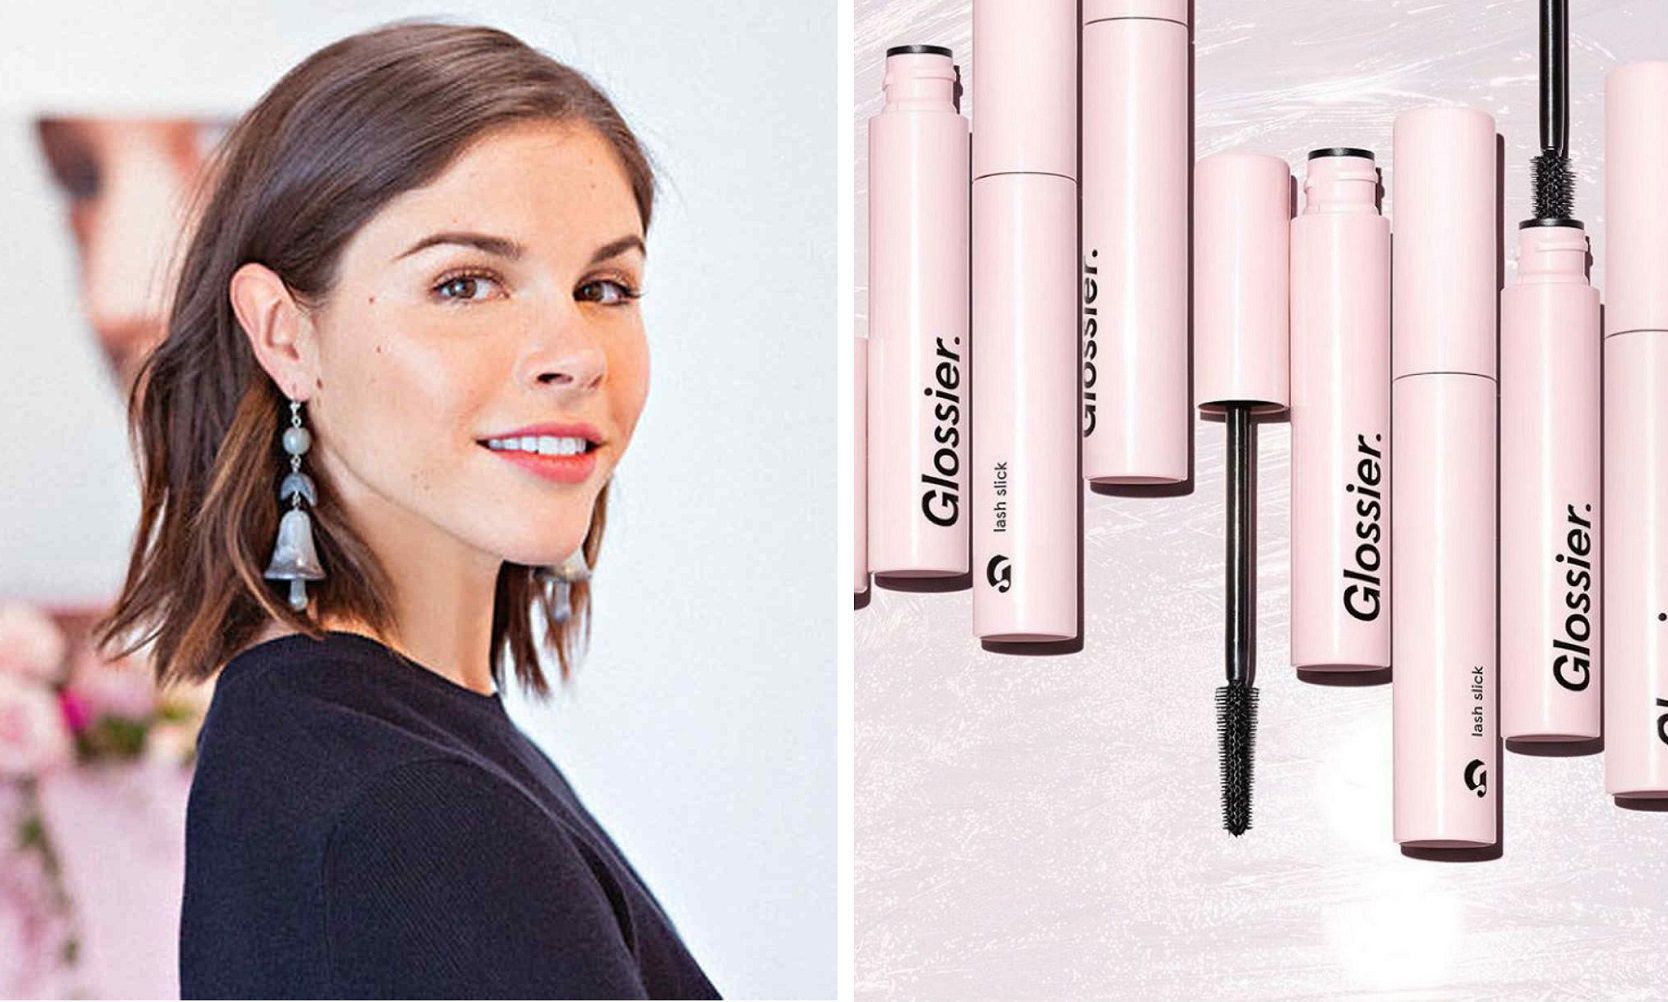 The remarkable case of Glossier, the skincare and beauty brand